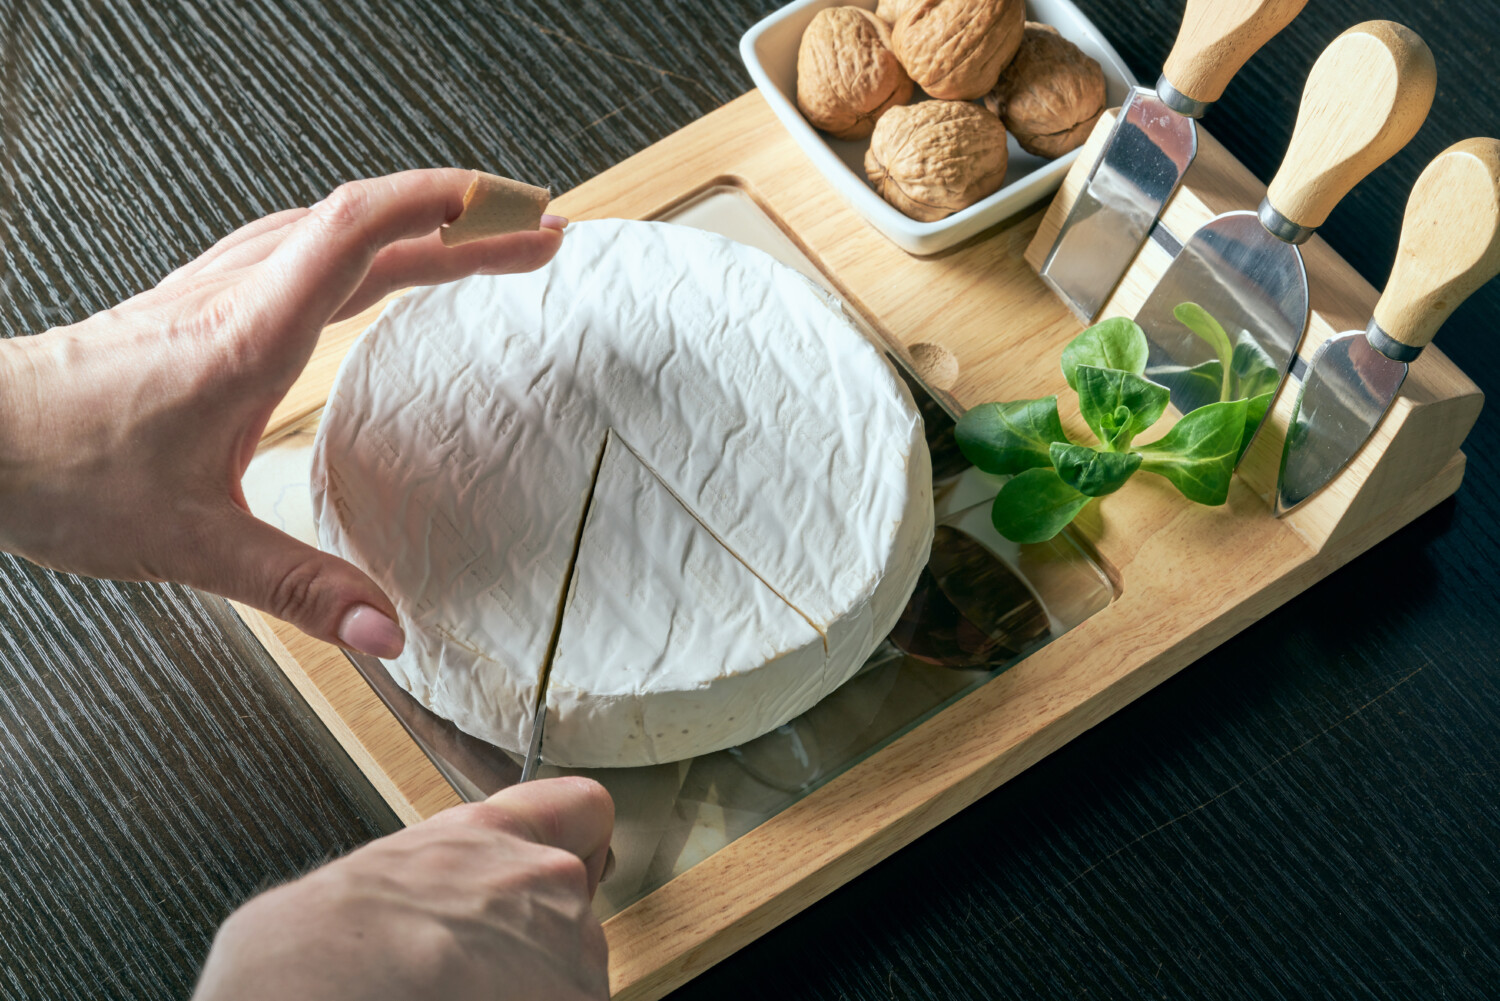 Hands slice brie on cutting board